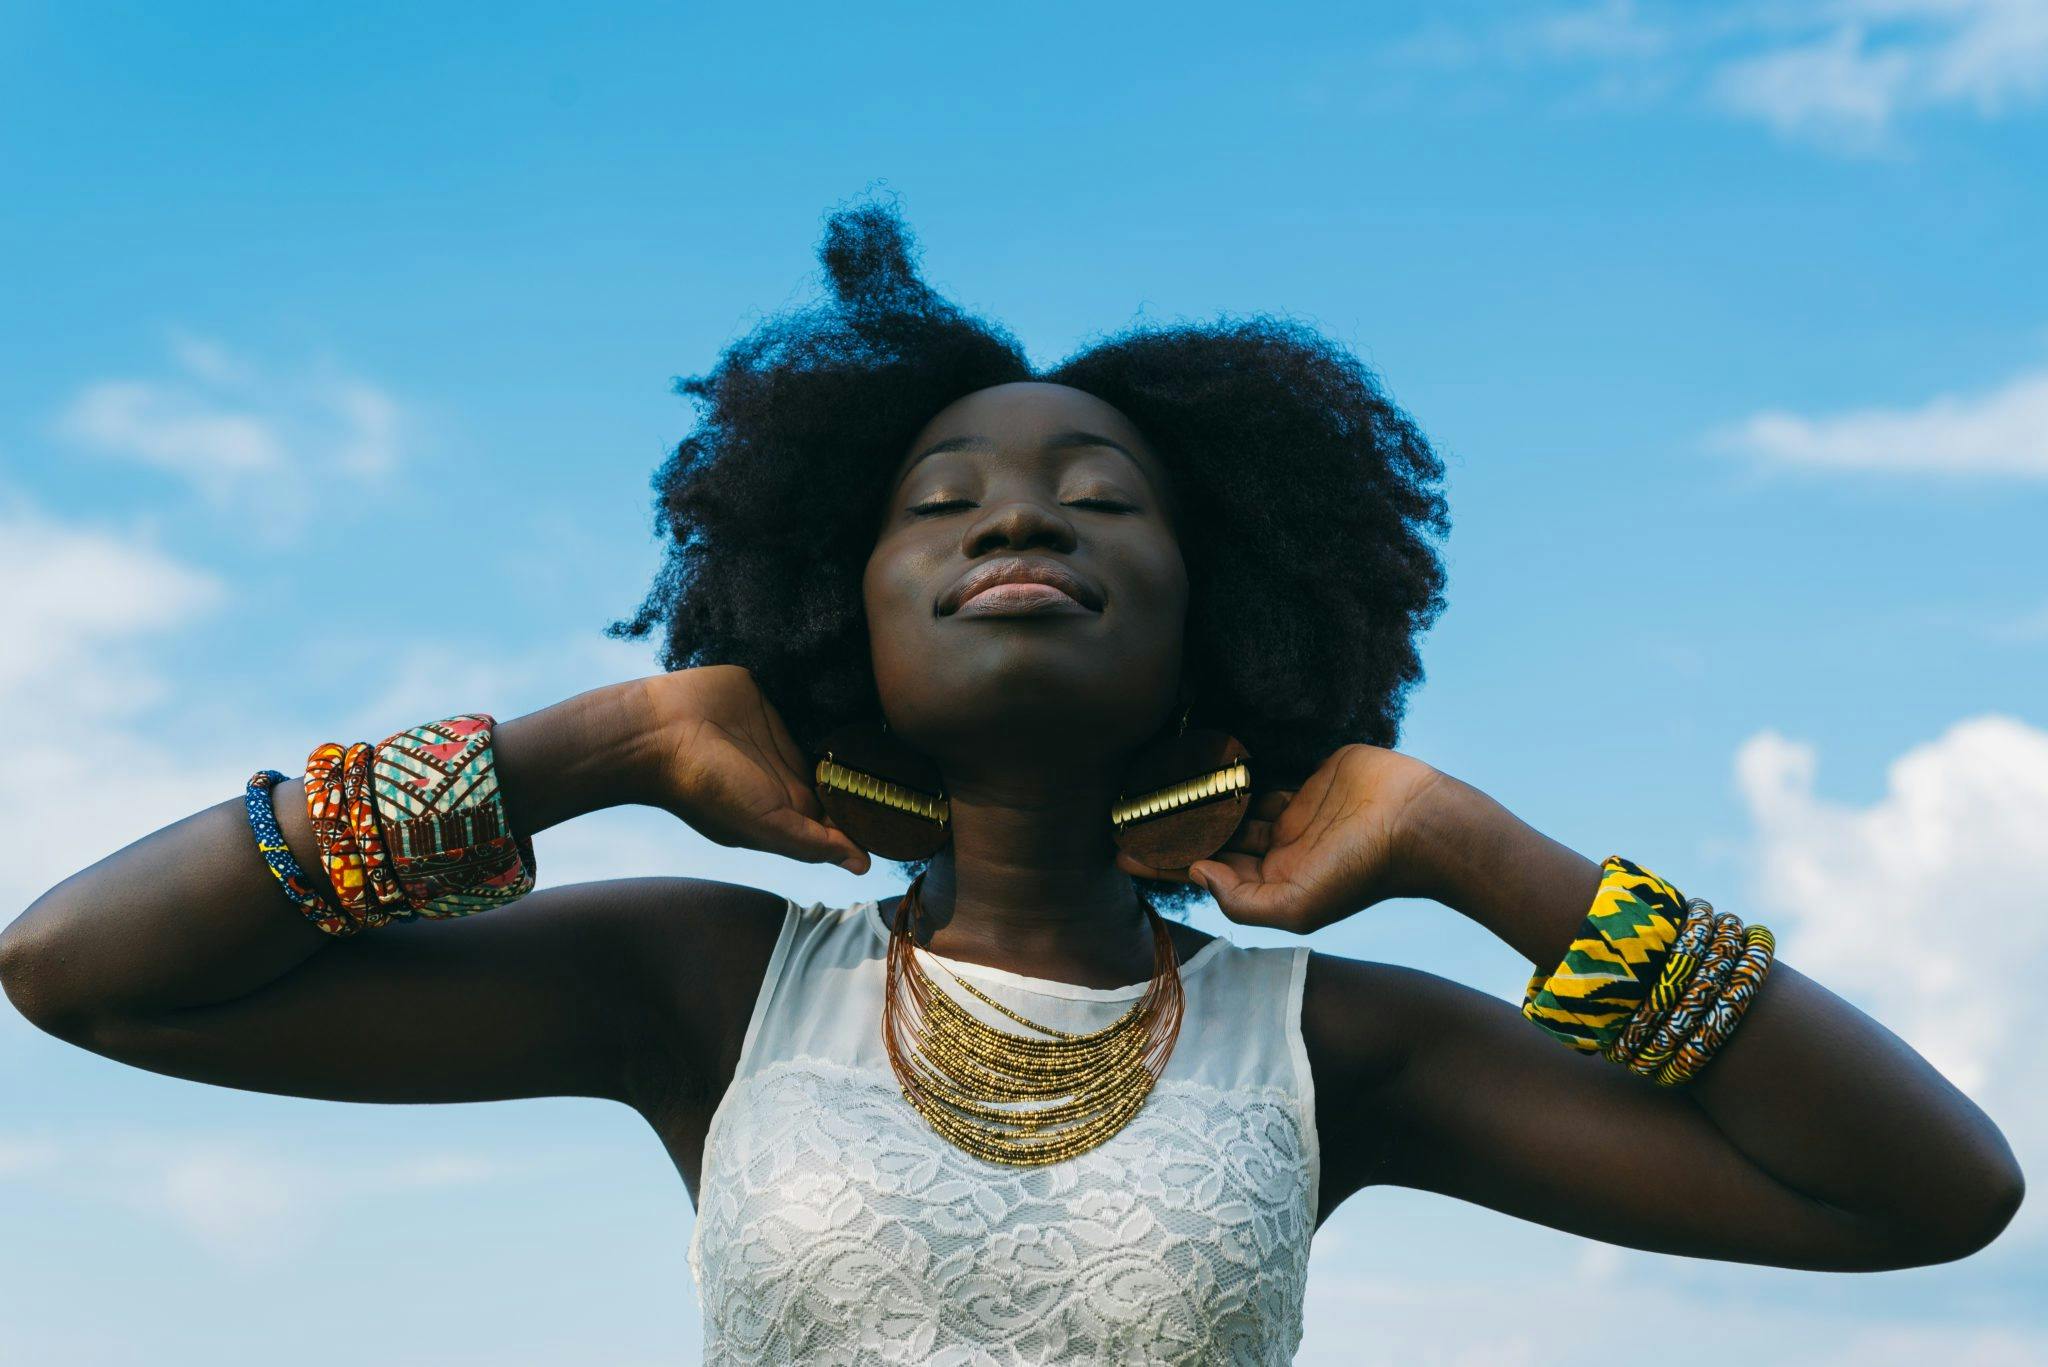 For illustration purposes only. A woman embraces her natural hair | Source: Pexels